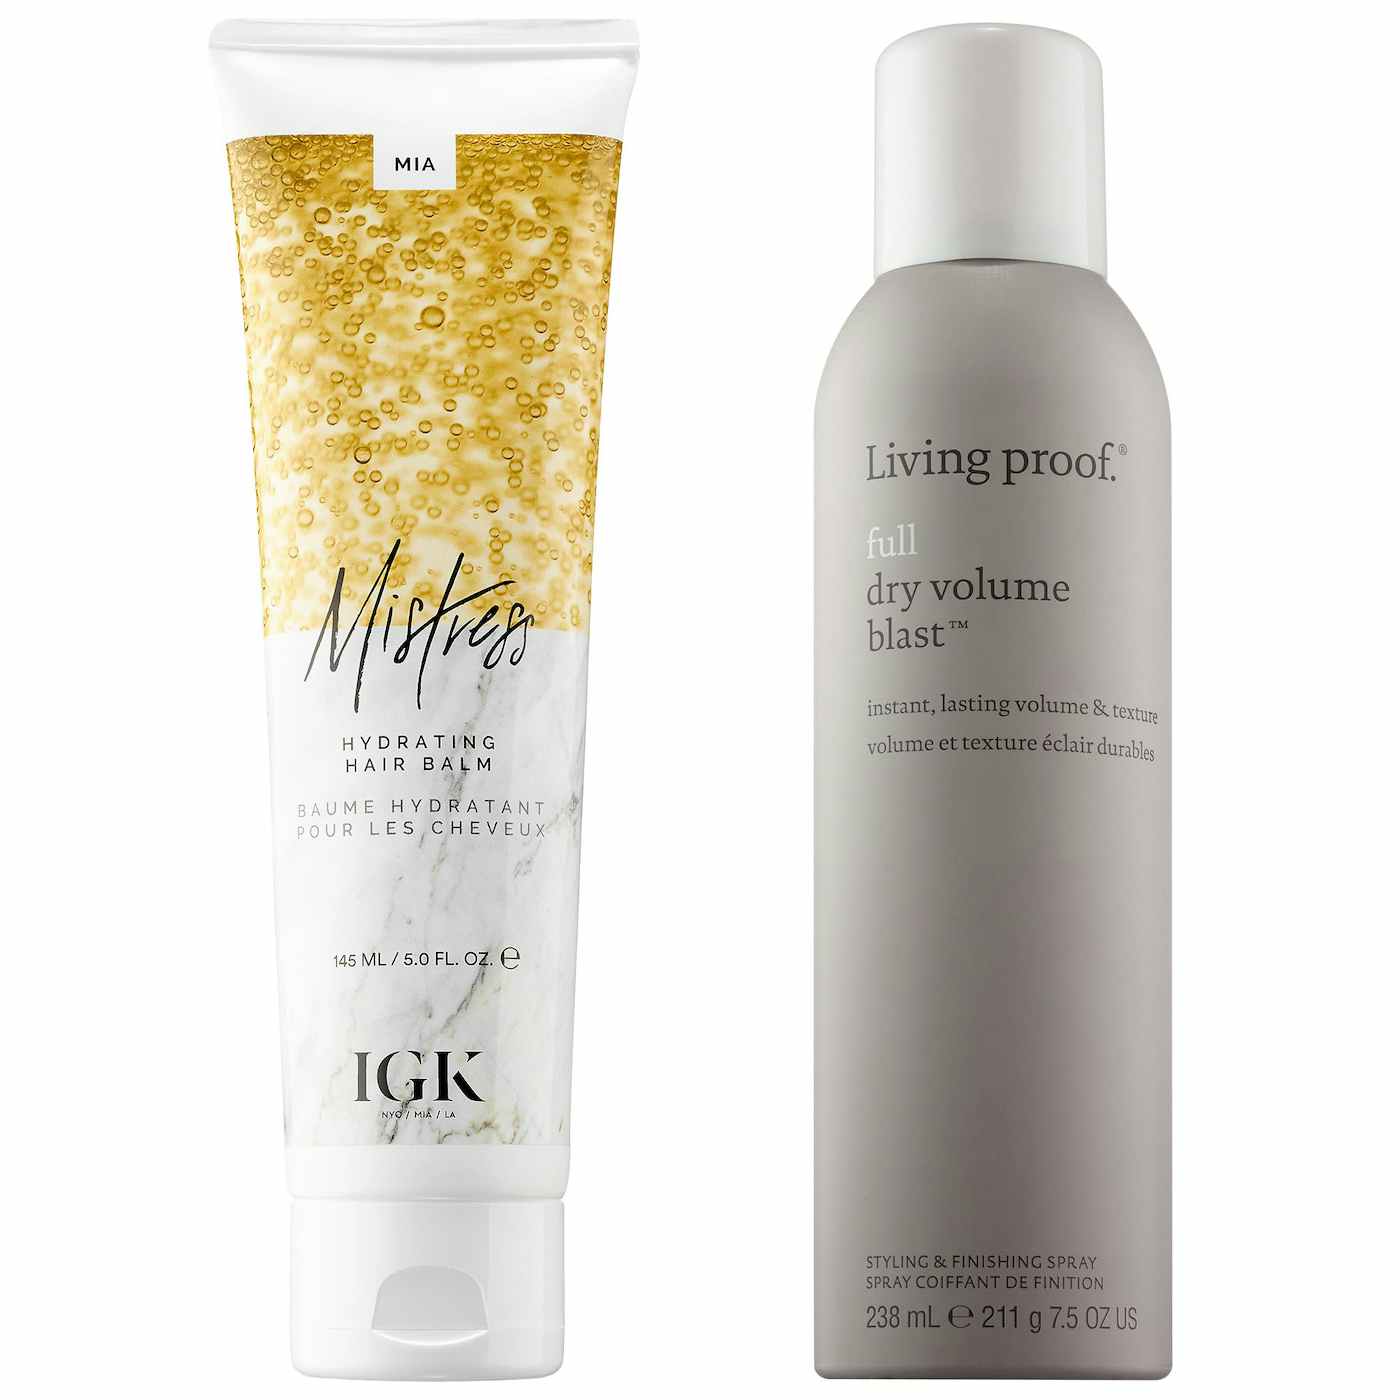 IGK Leave-in Conditioner and Living Proof Texture Spray